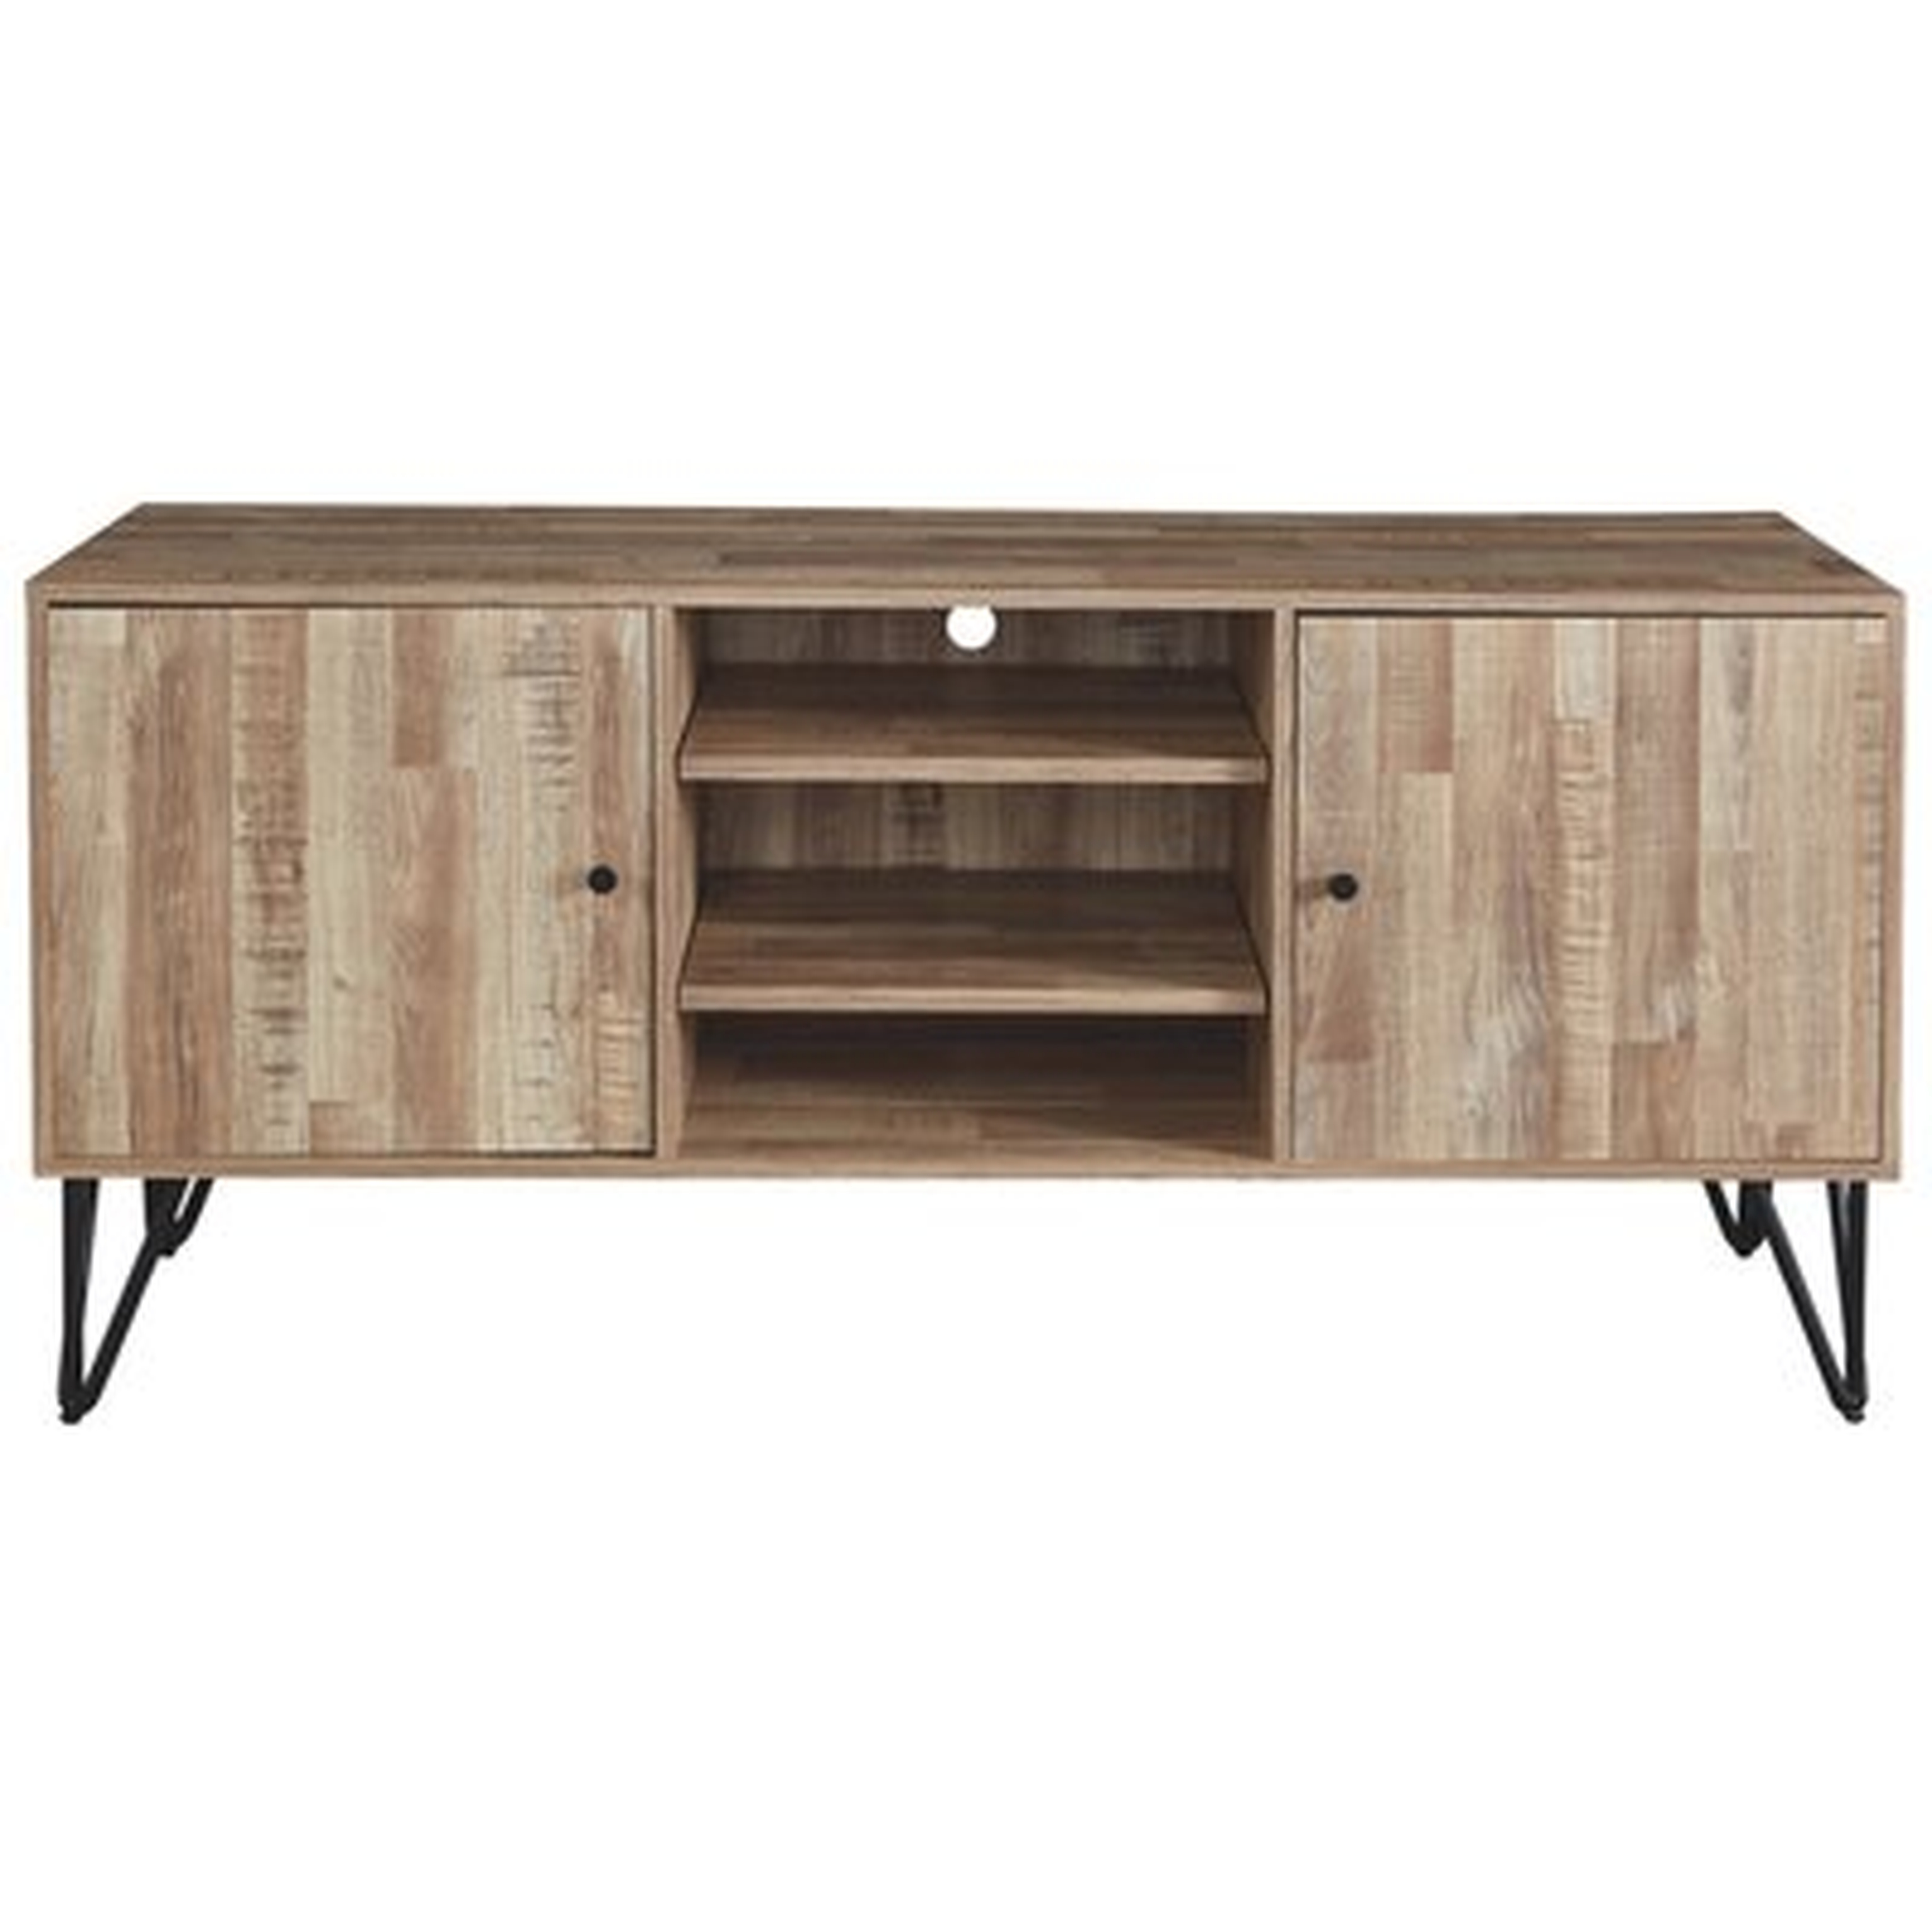 Paradiso TV Stand for TVs up to 55" - Wayfair